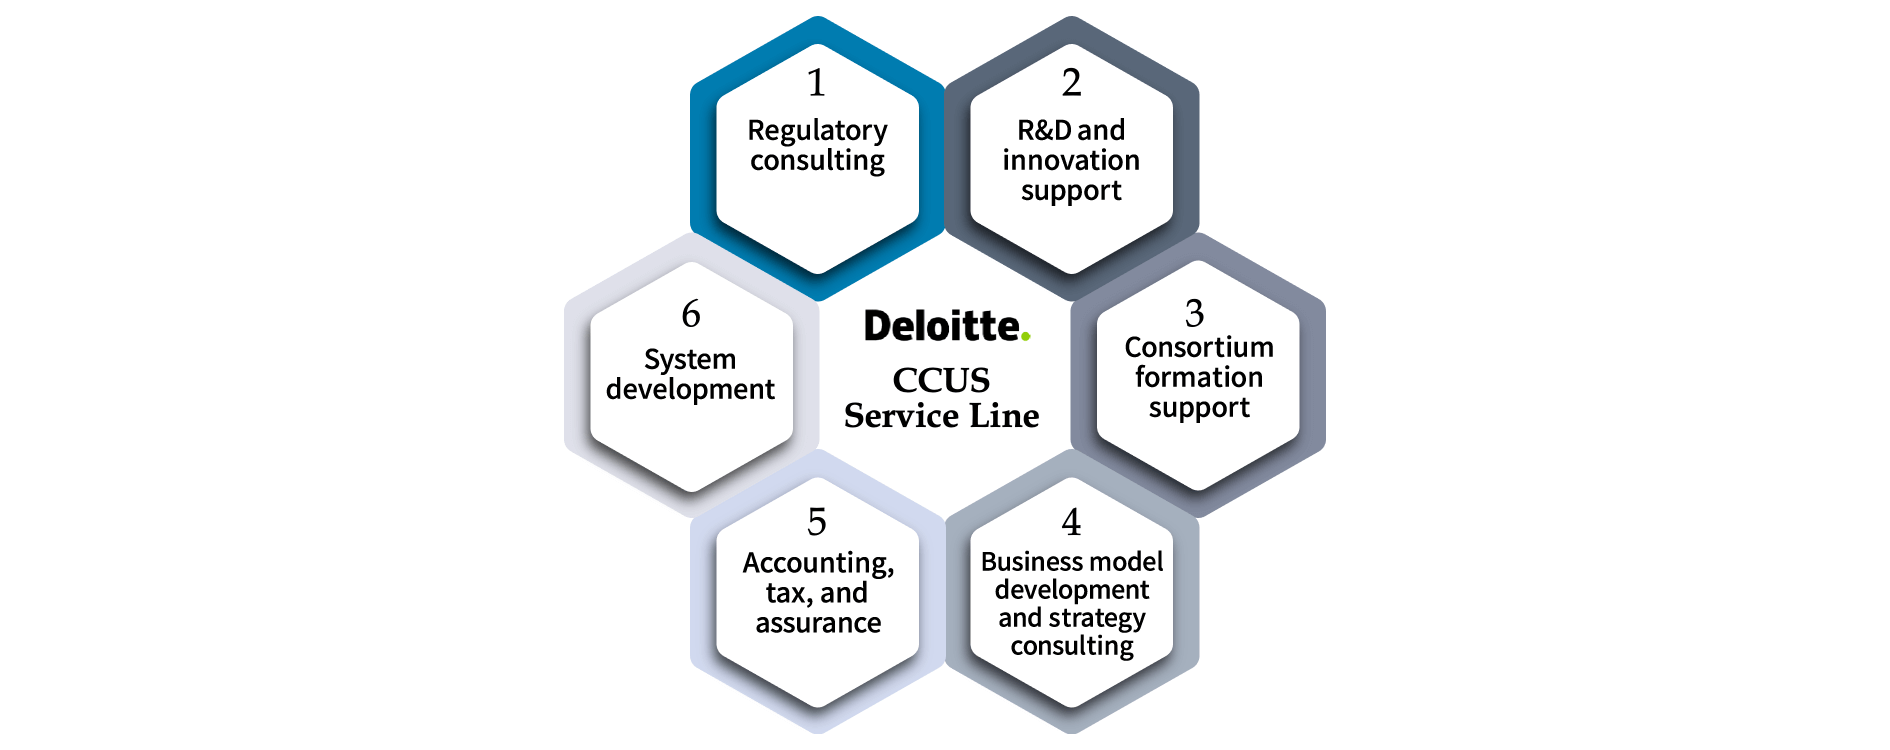 CCUS-related services that Deloitte provides